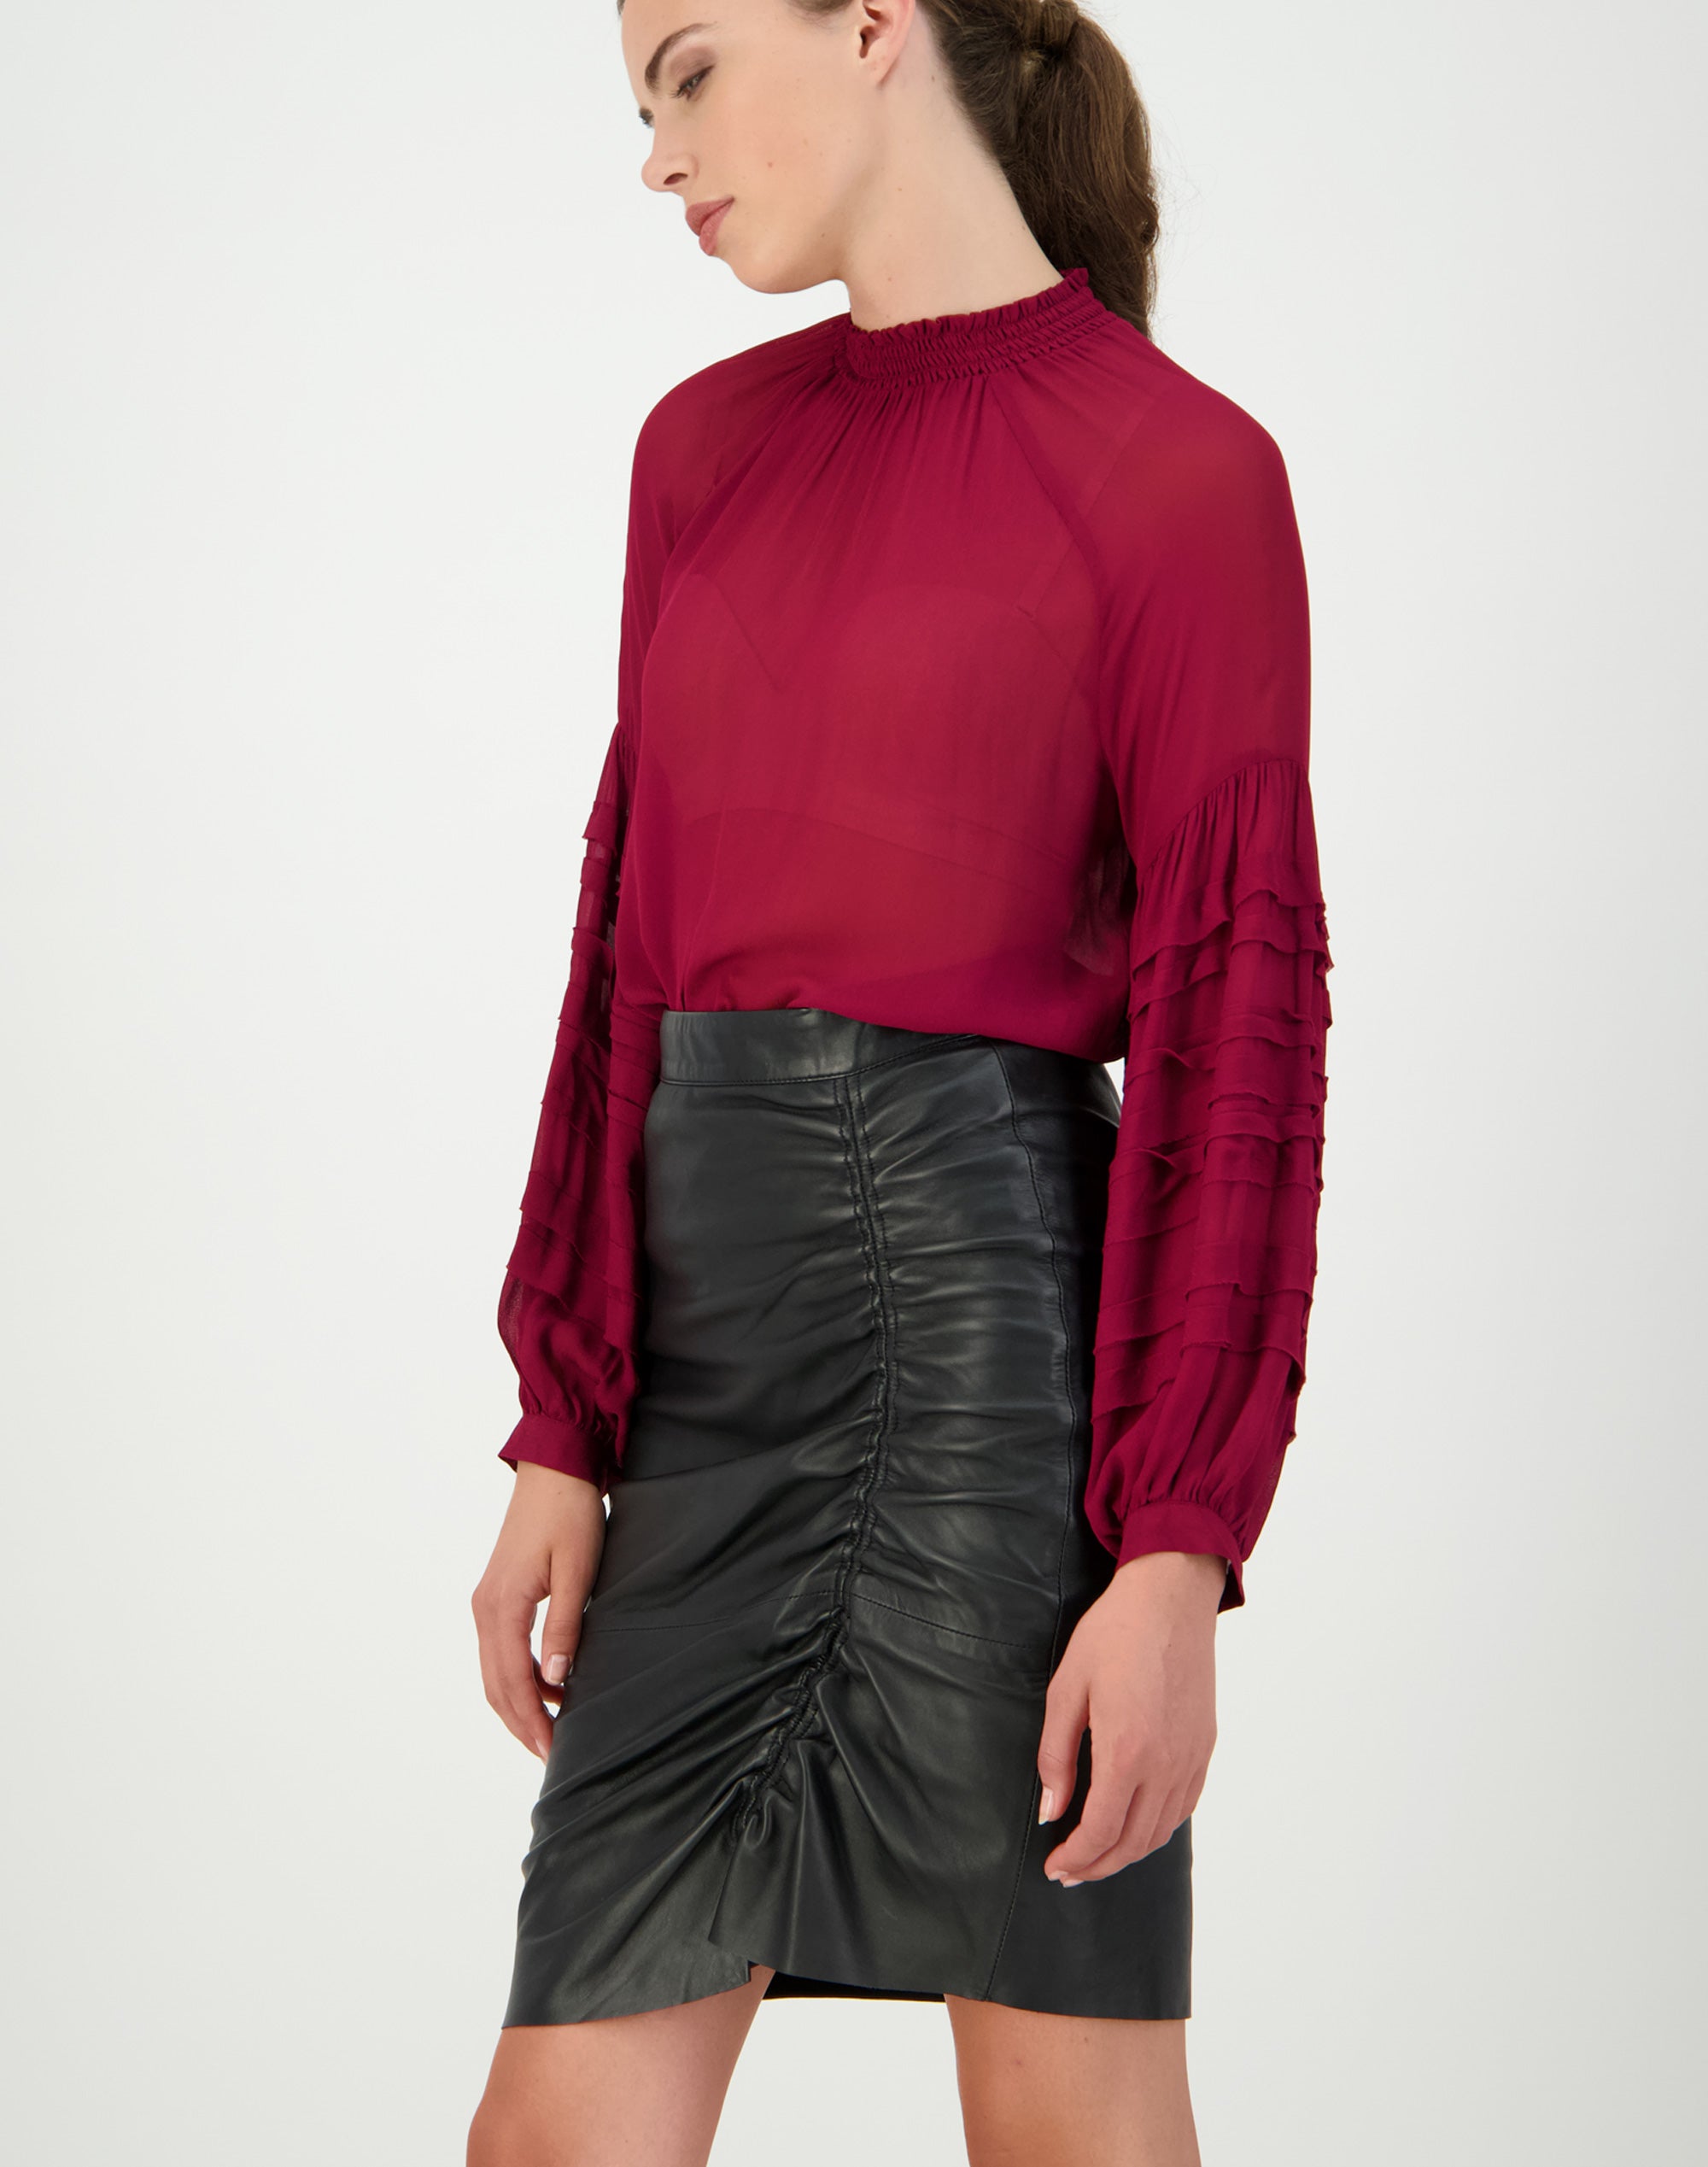 Ruched Leather Skirt